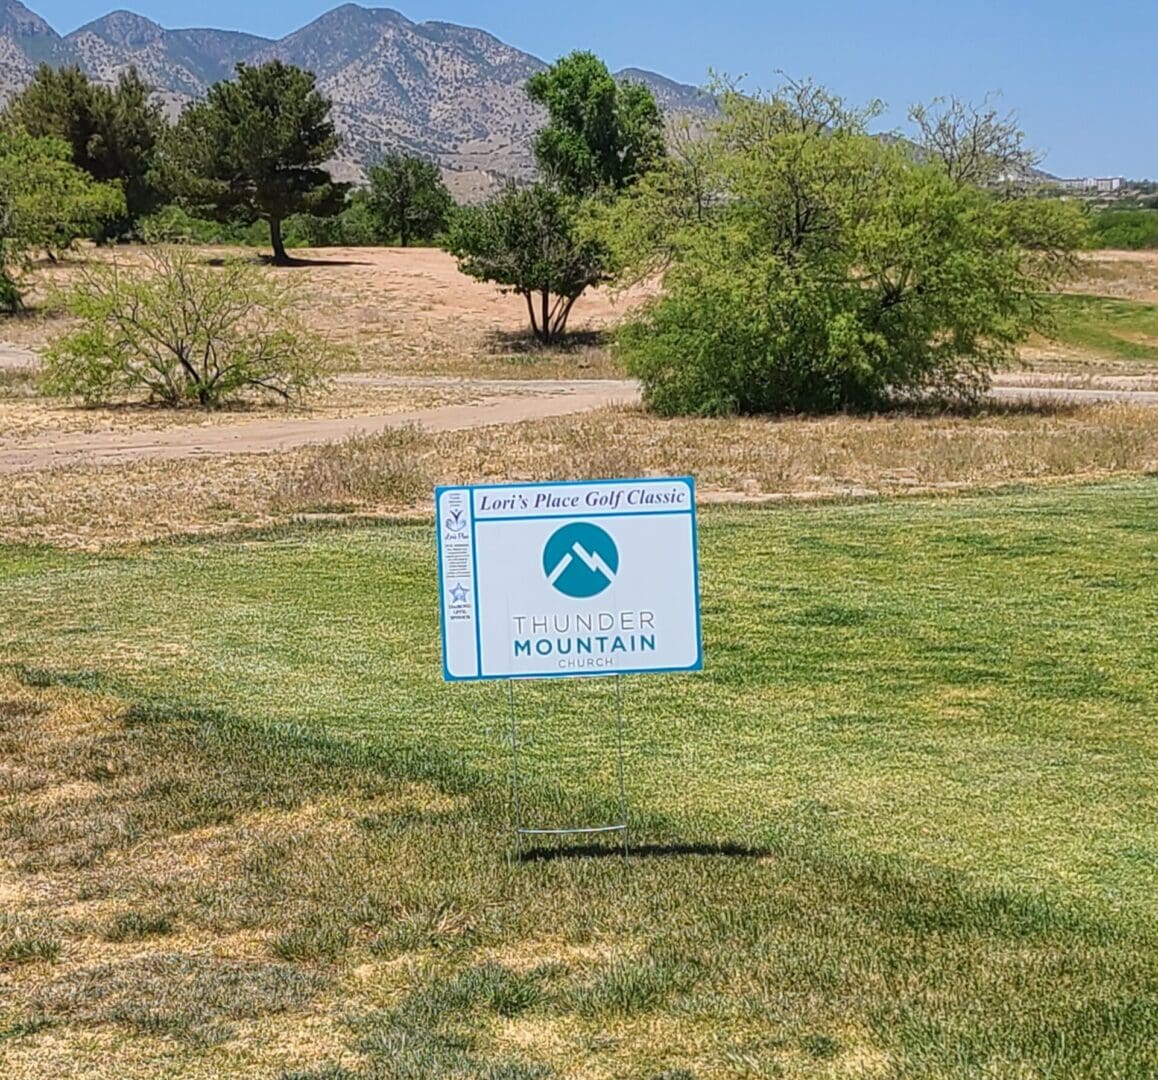 A sign in the middle of an open field.